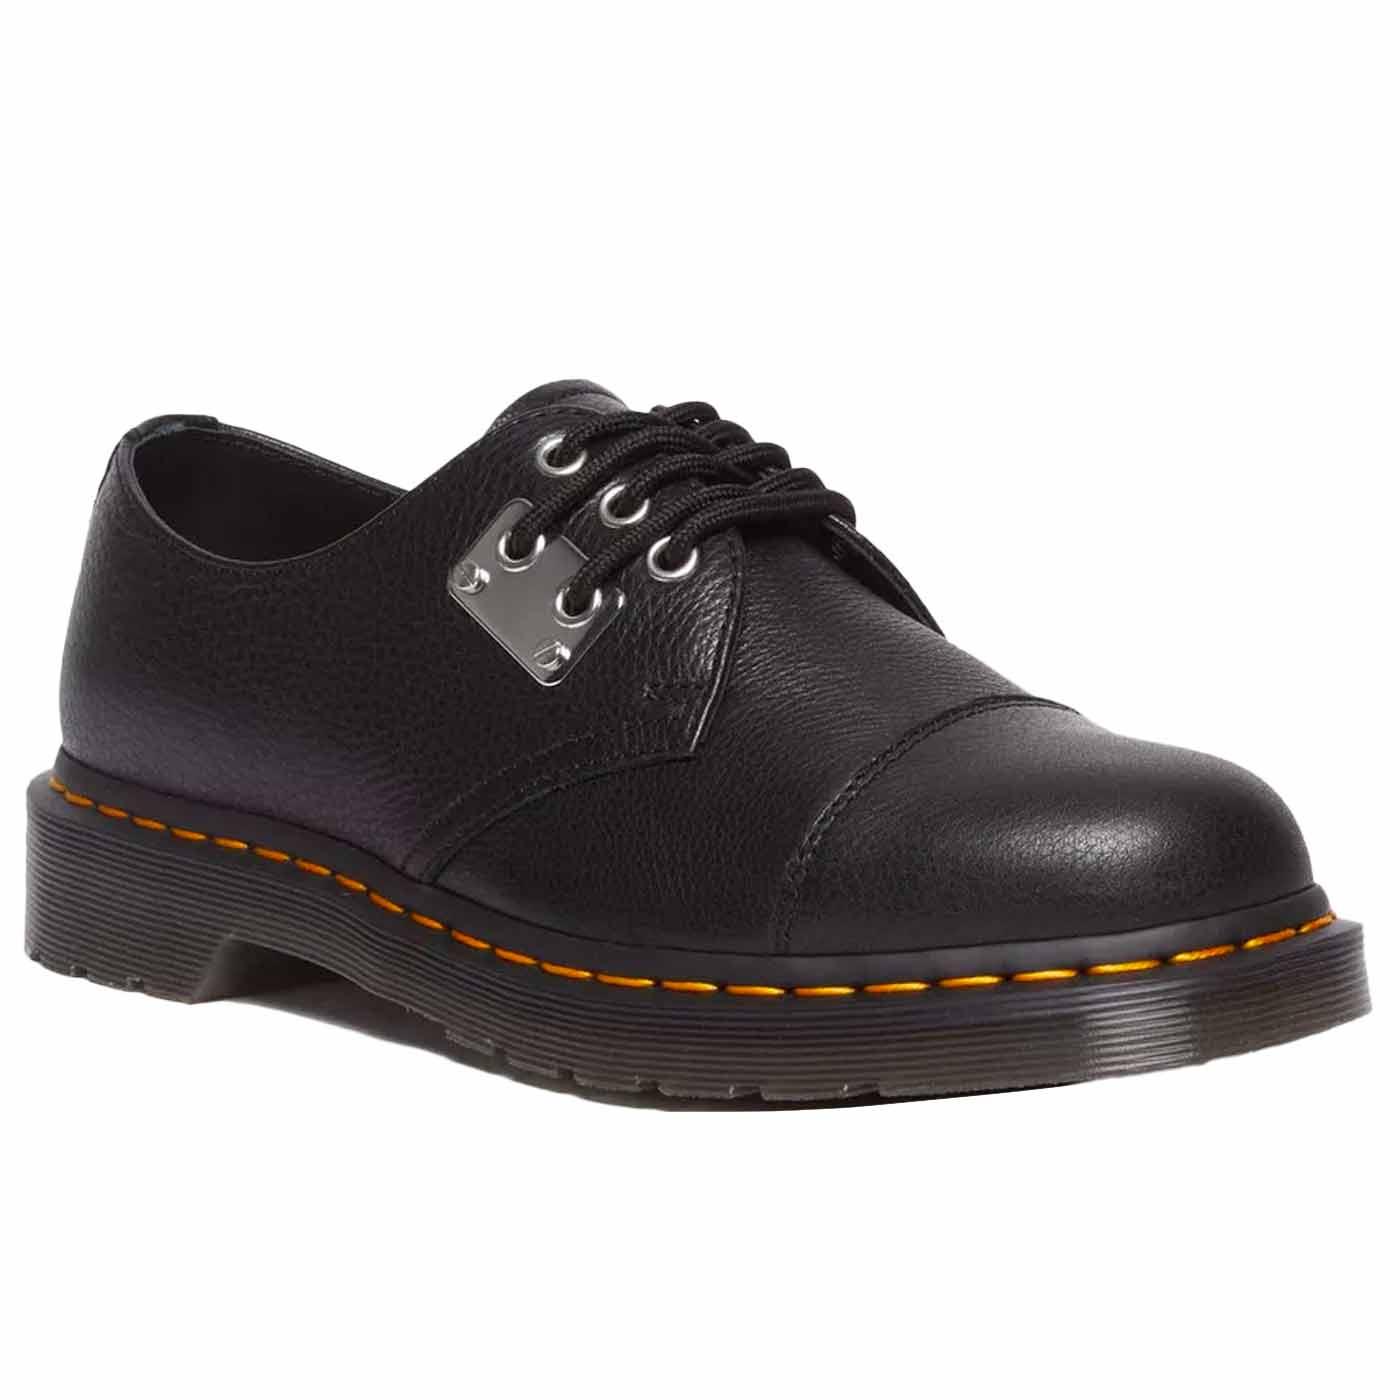 1461 Dr Martens Toe Plate Leather Oxford Shoes B